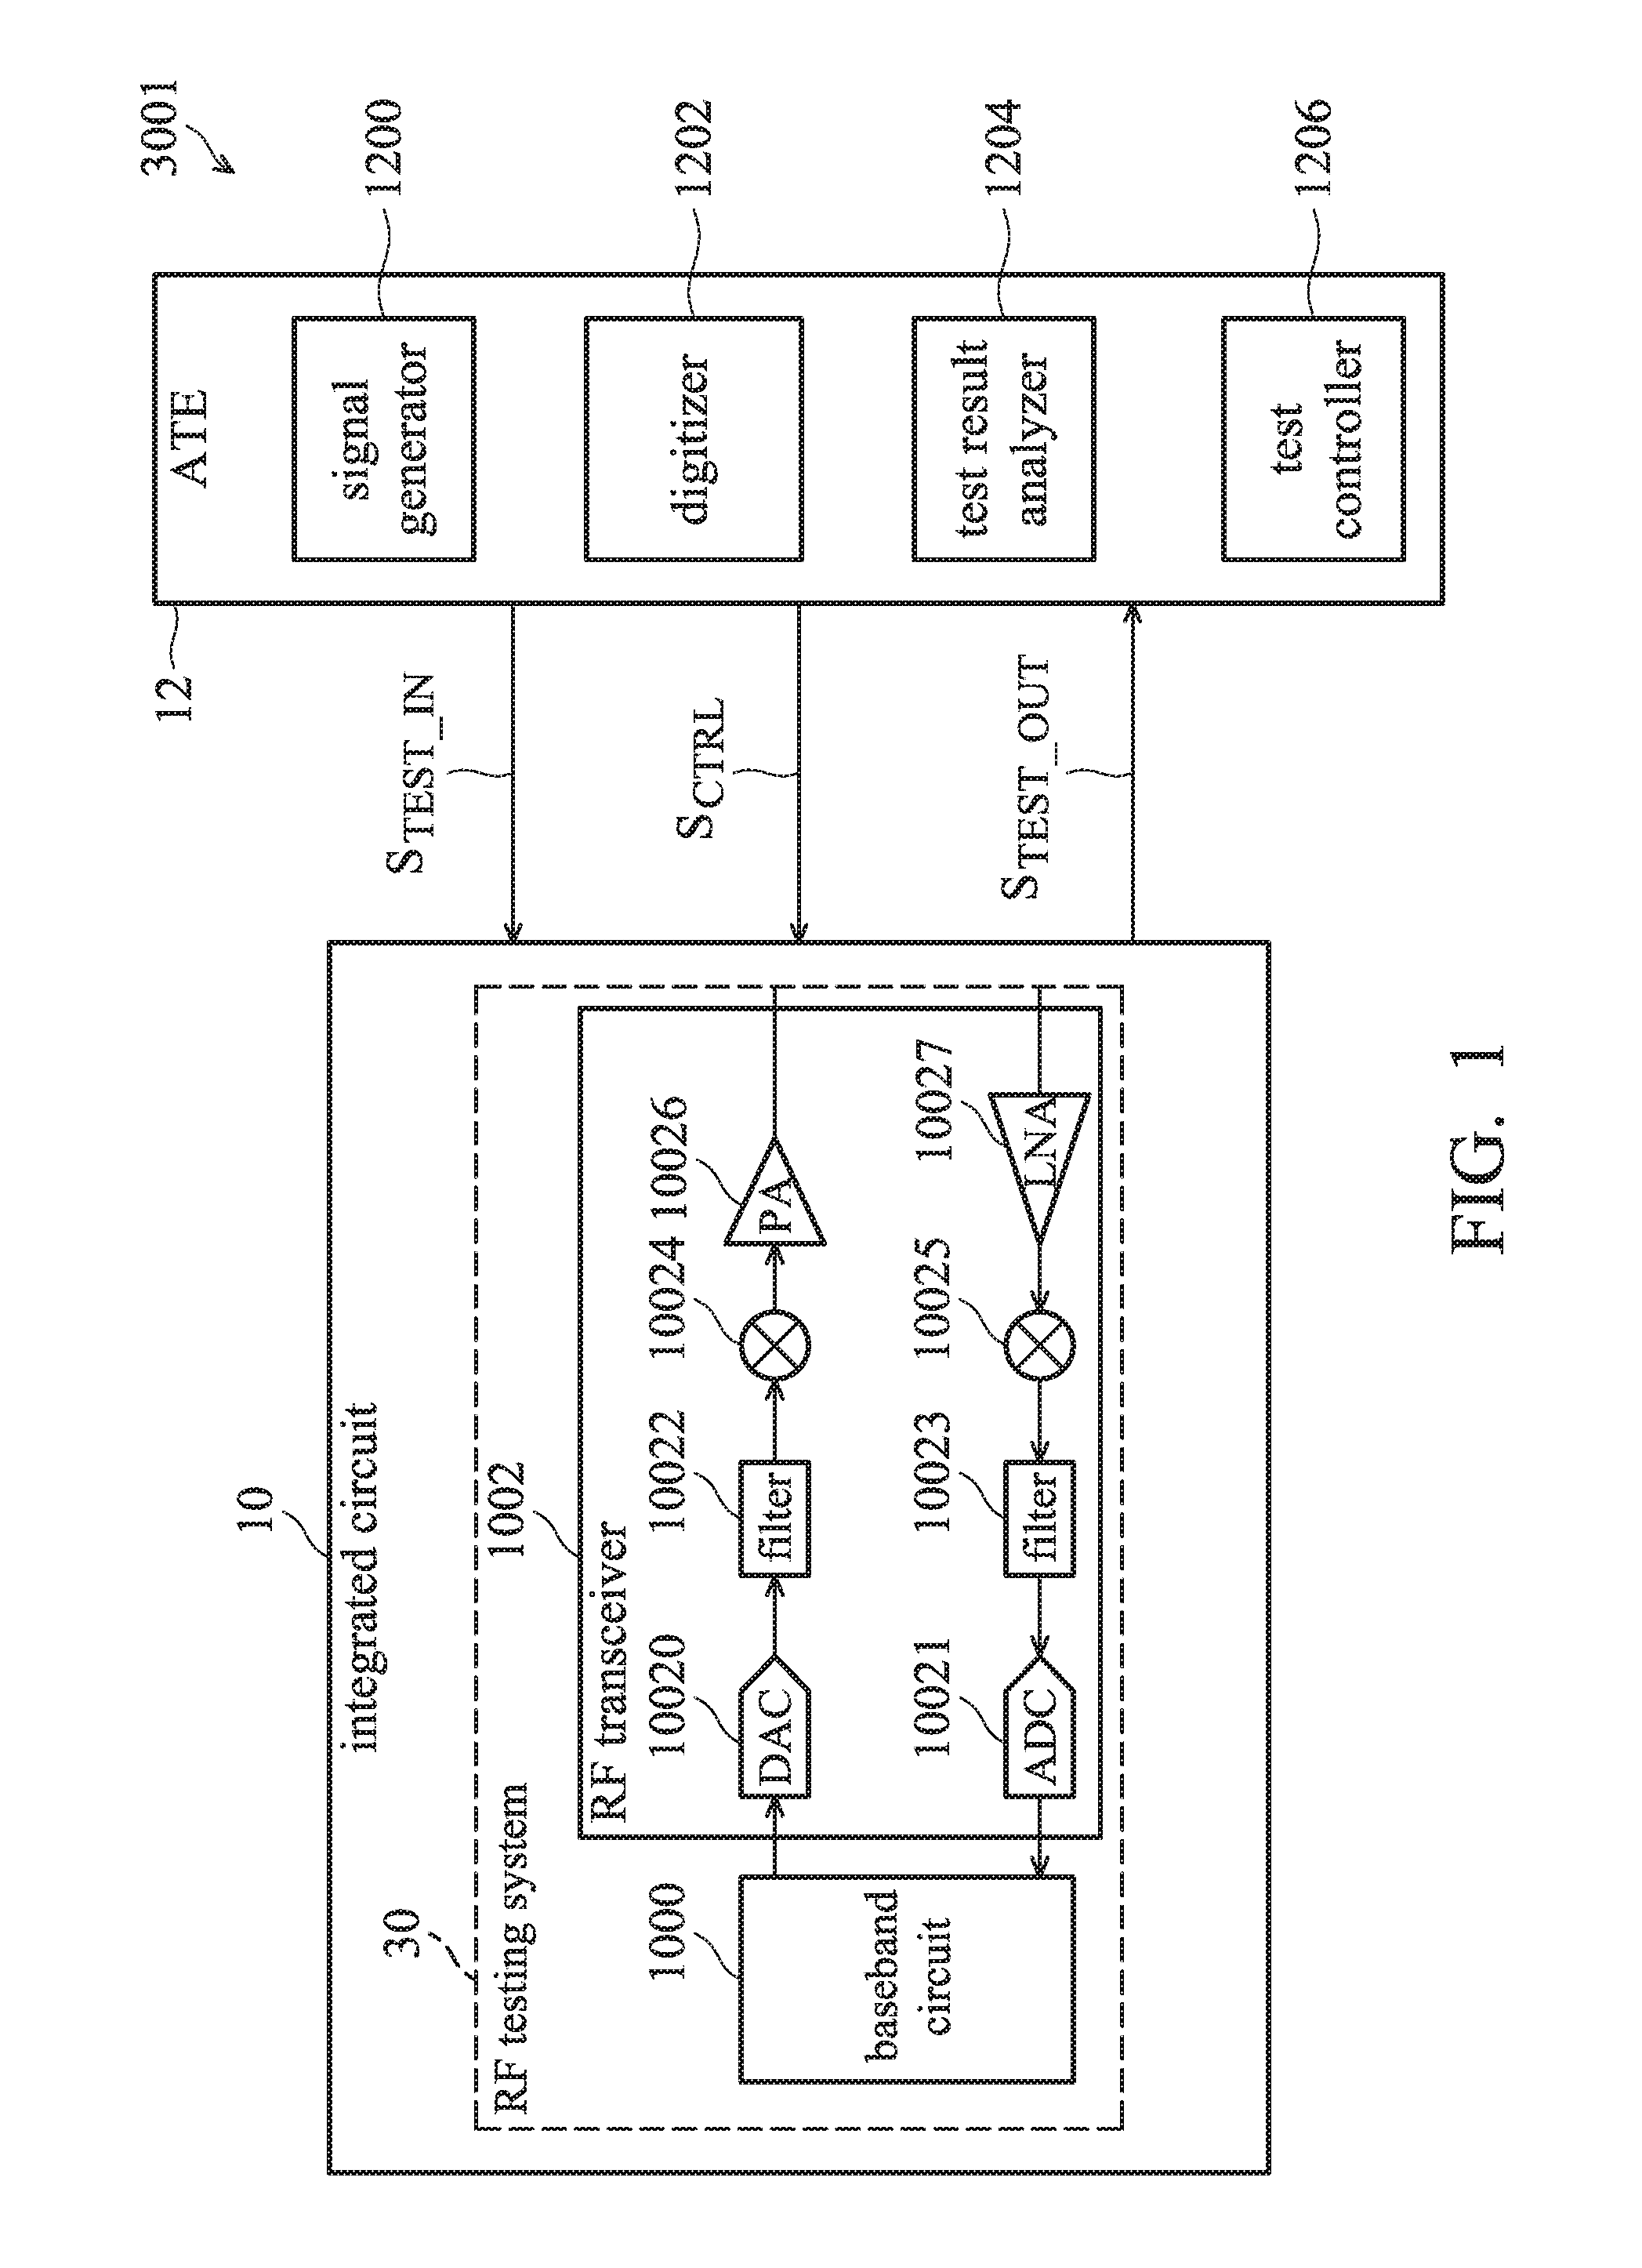 RF testing system with parallelized processing